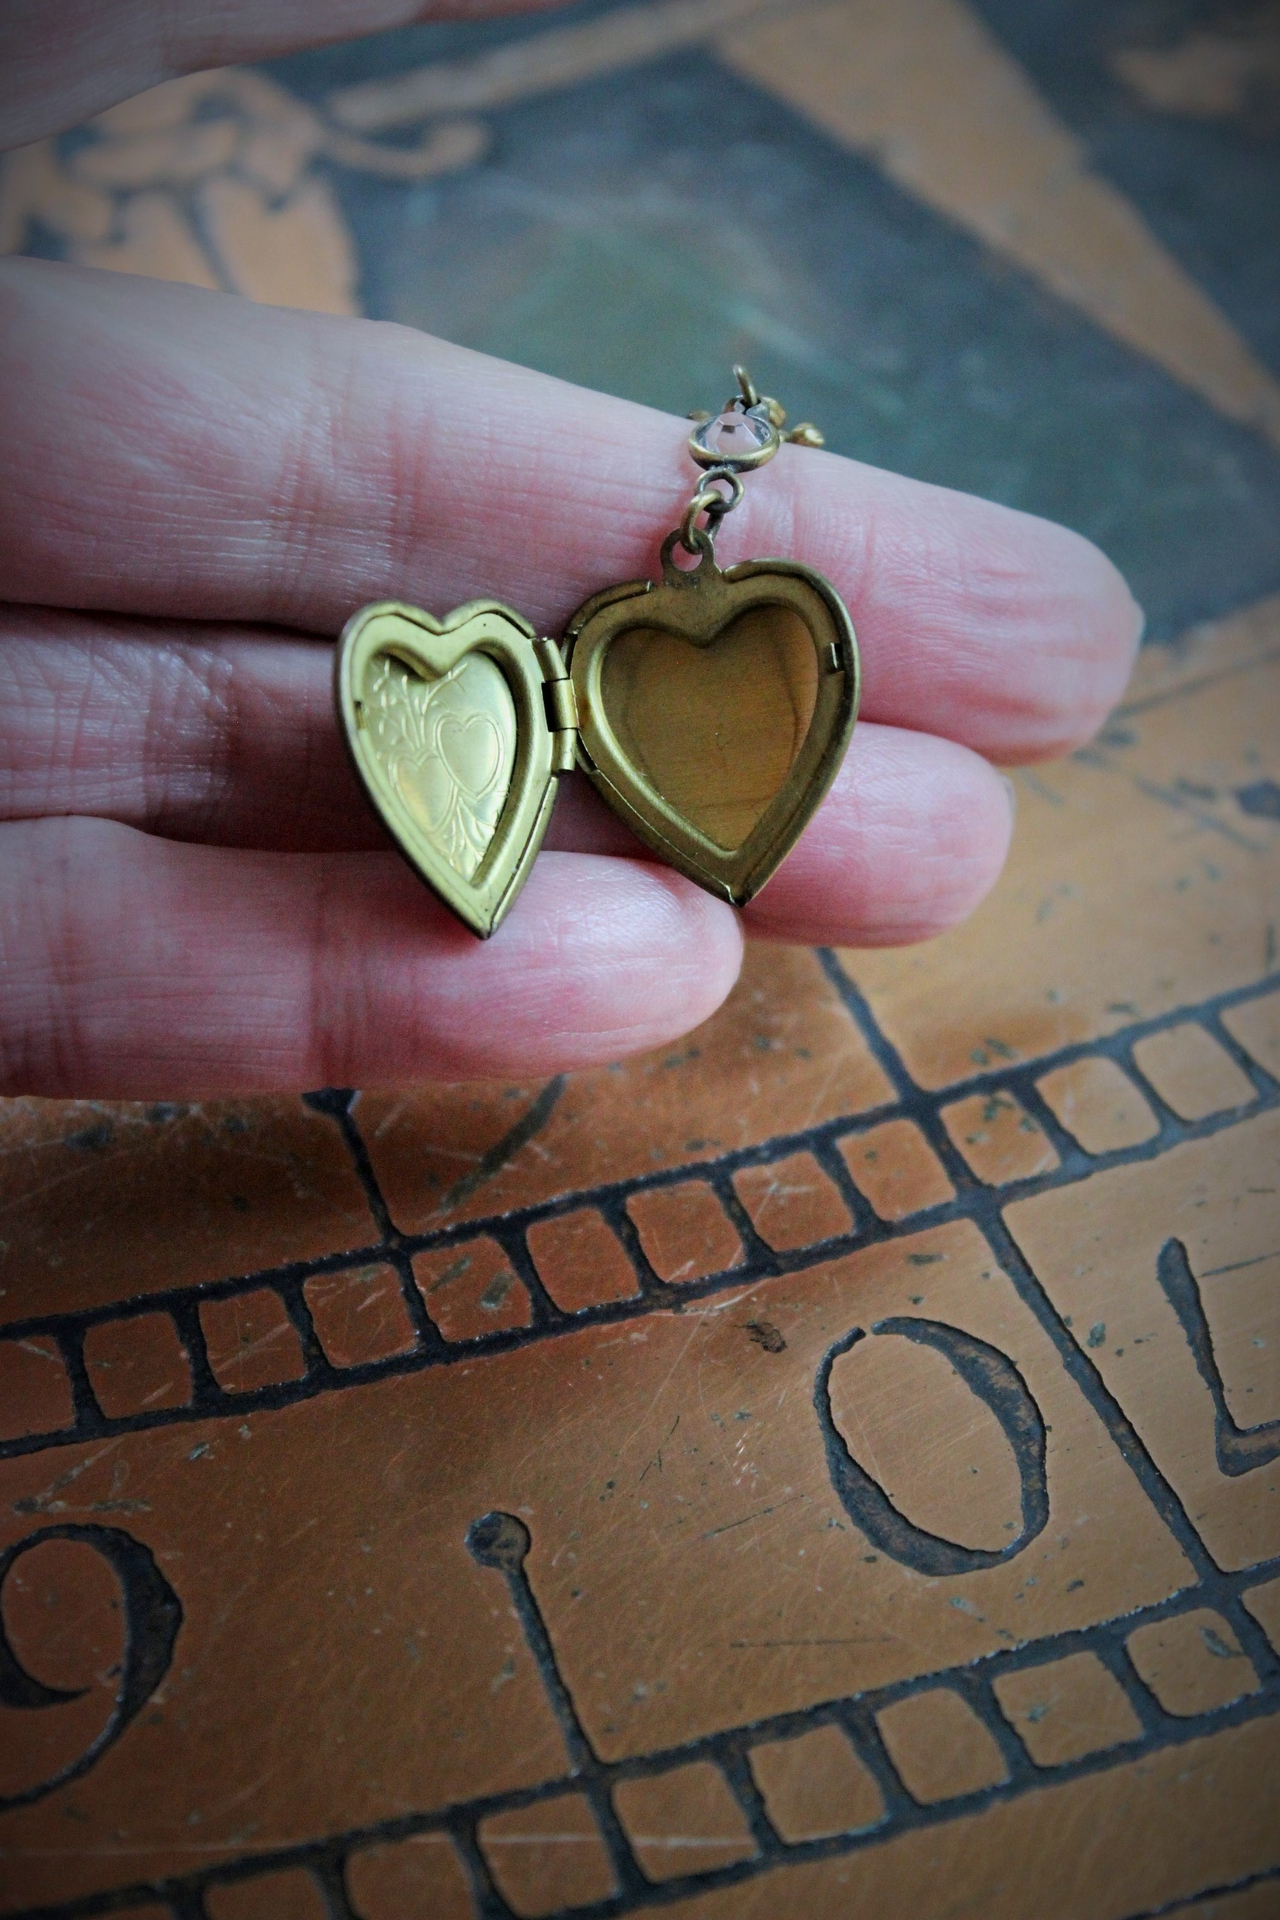 Antique Etruscan Findings & Vintage Heart Lockets Earrings - 50% Off w/purchase of matching necklace!